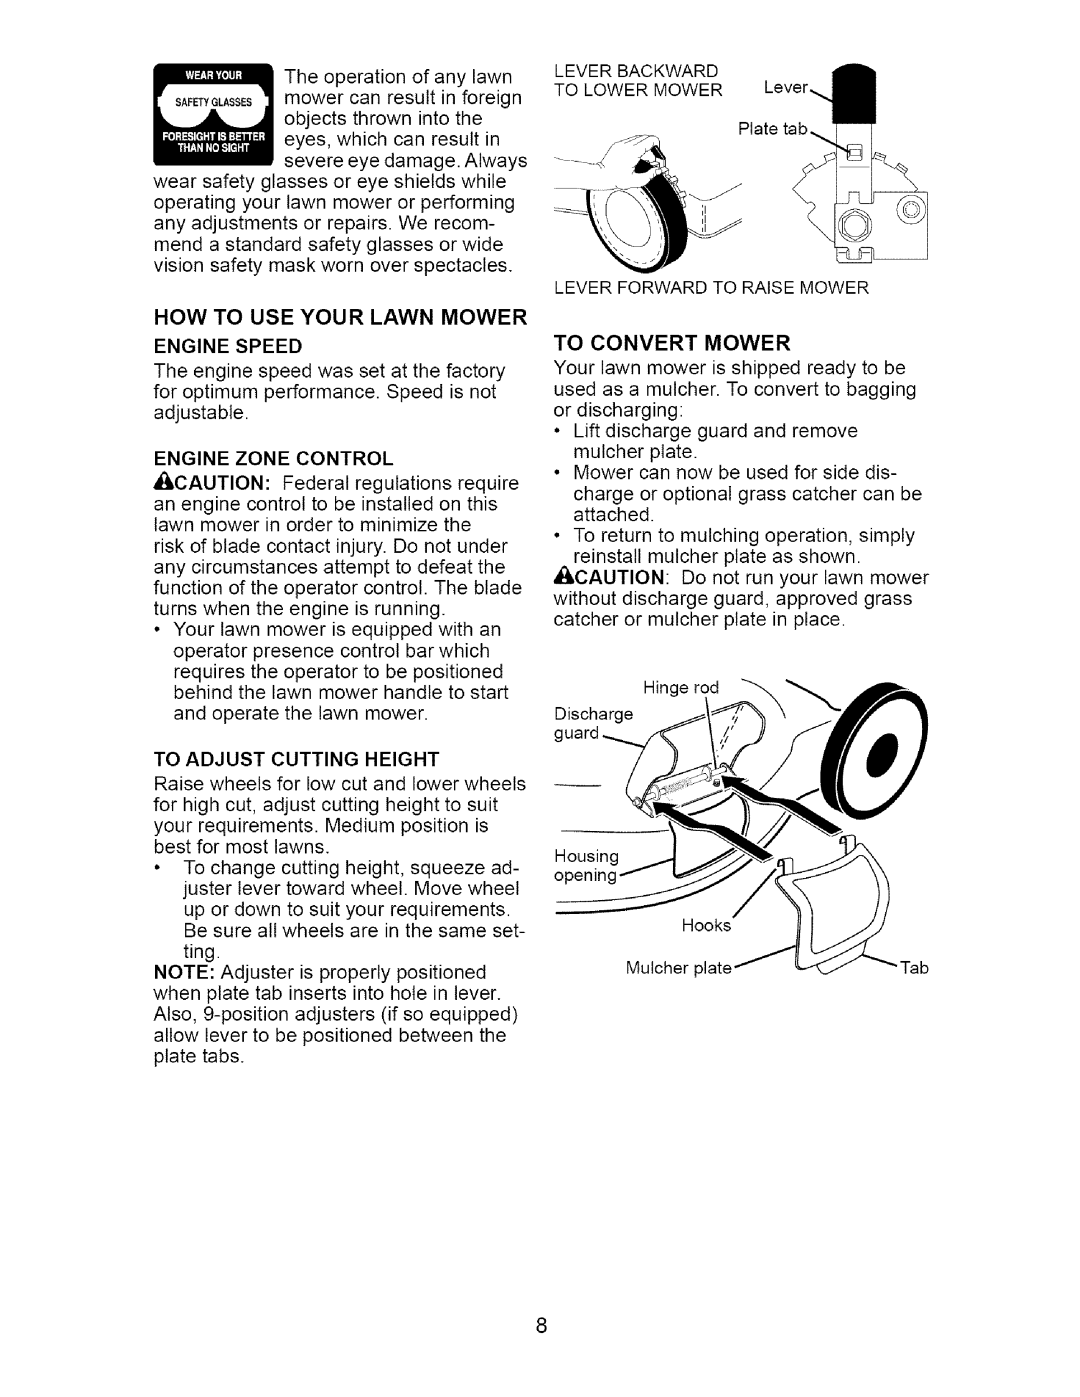 Craftsman 917.385140 owner manual How To Use Your Lawn Mower, To Adjust Cutting Height 